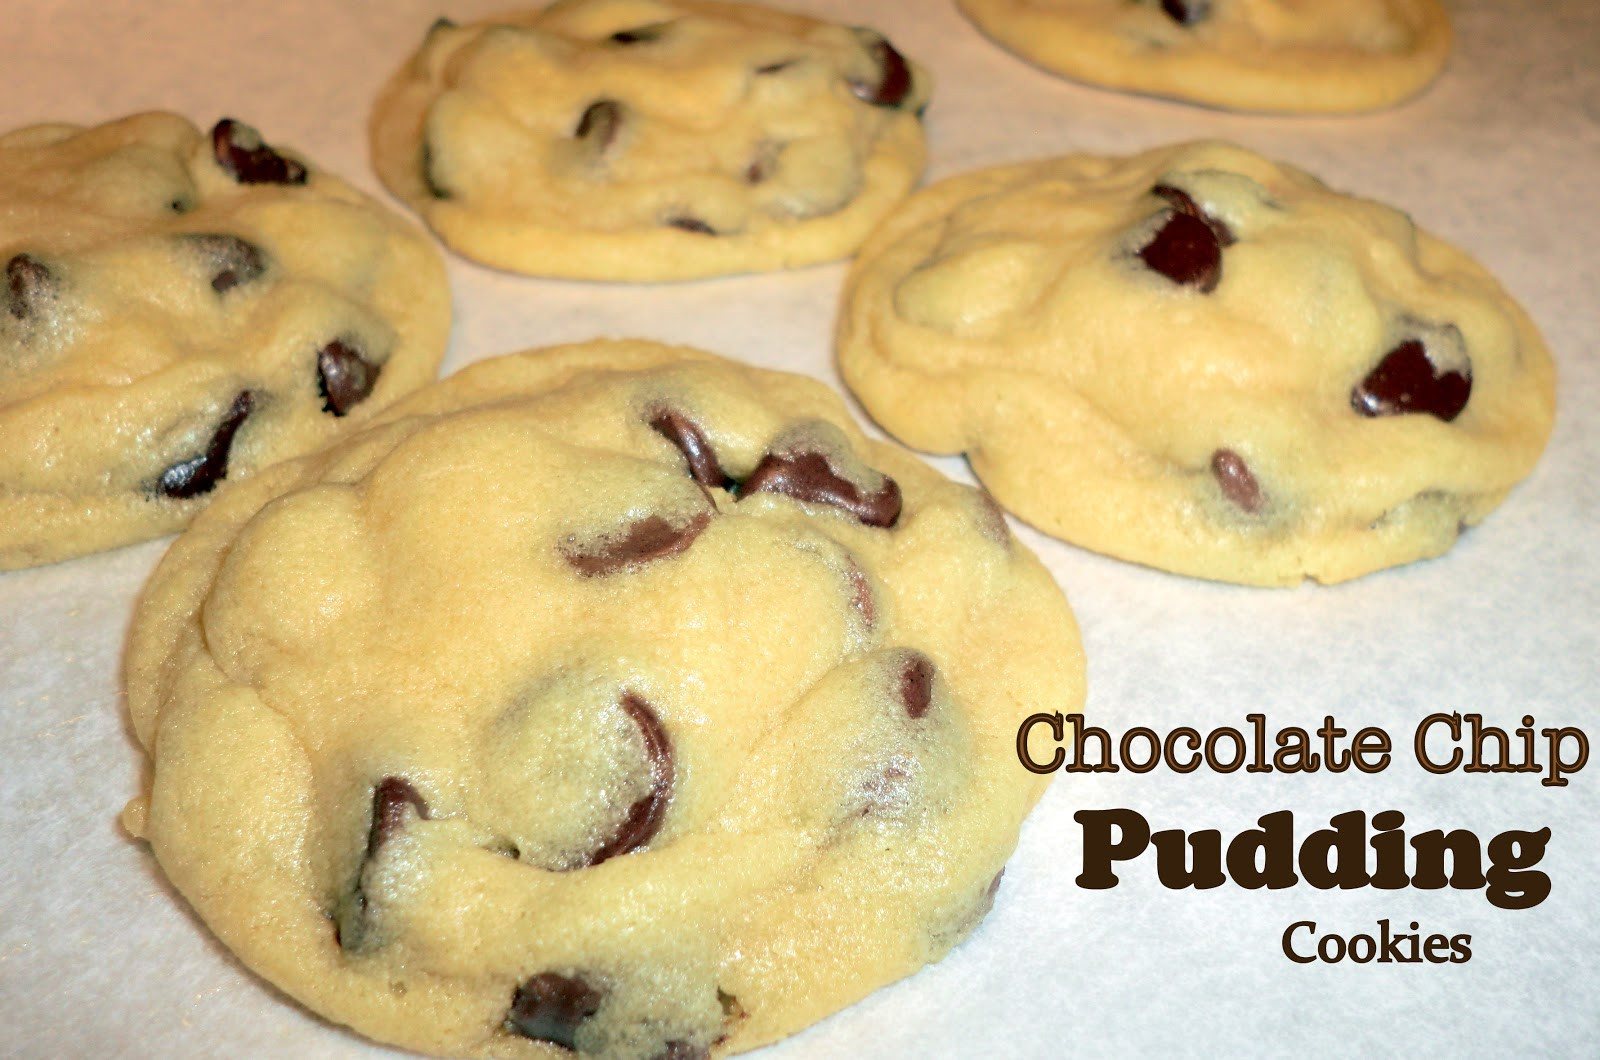 Chocolate Chip Cookies With Pudding
 The Cookie Jar Chocolate Chip Pudding Cookies